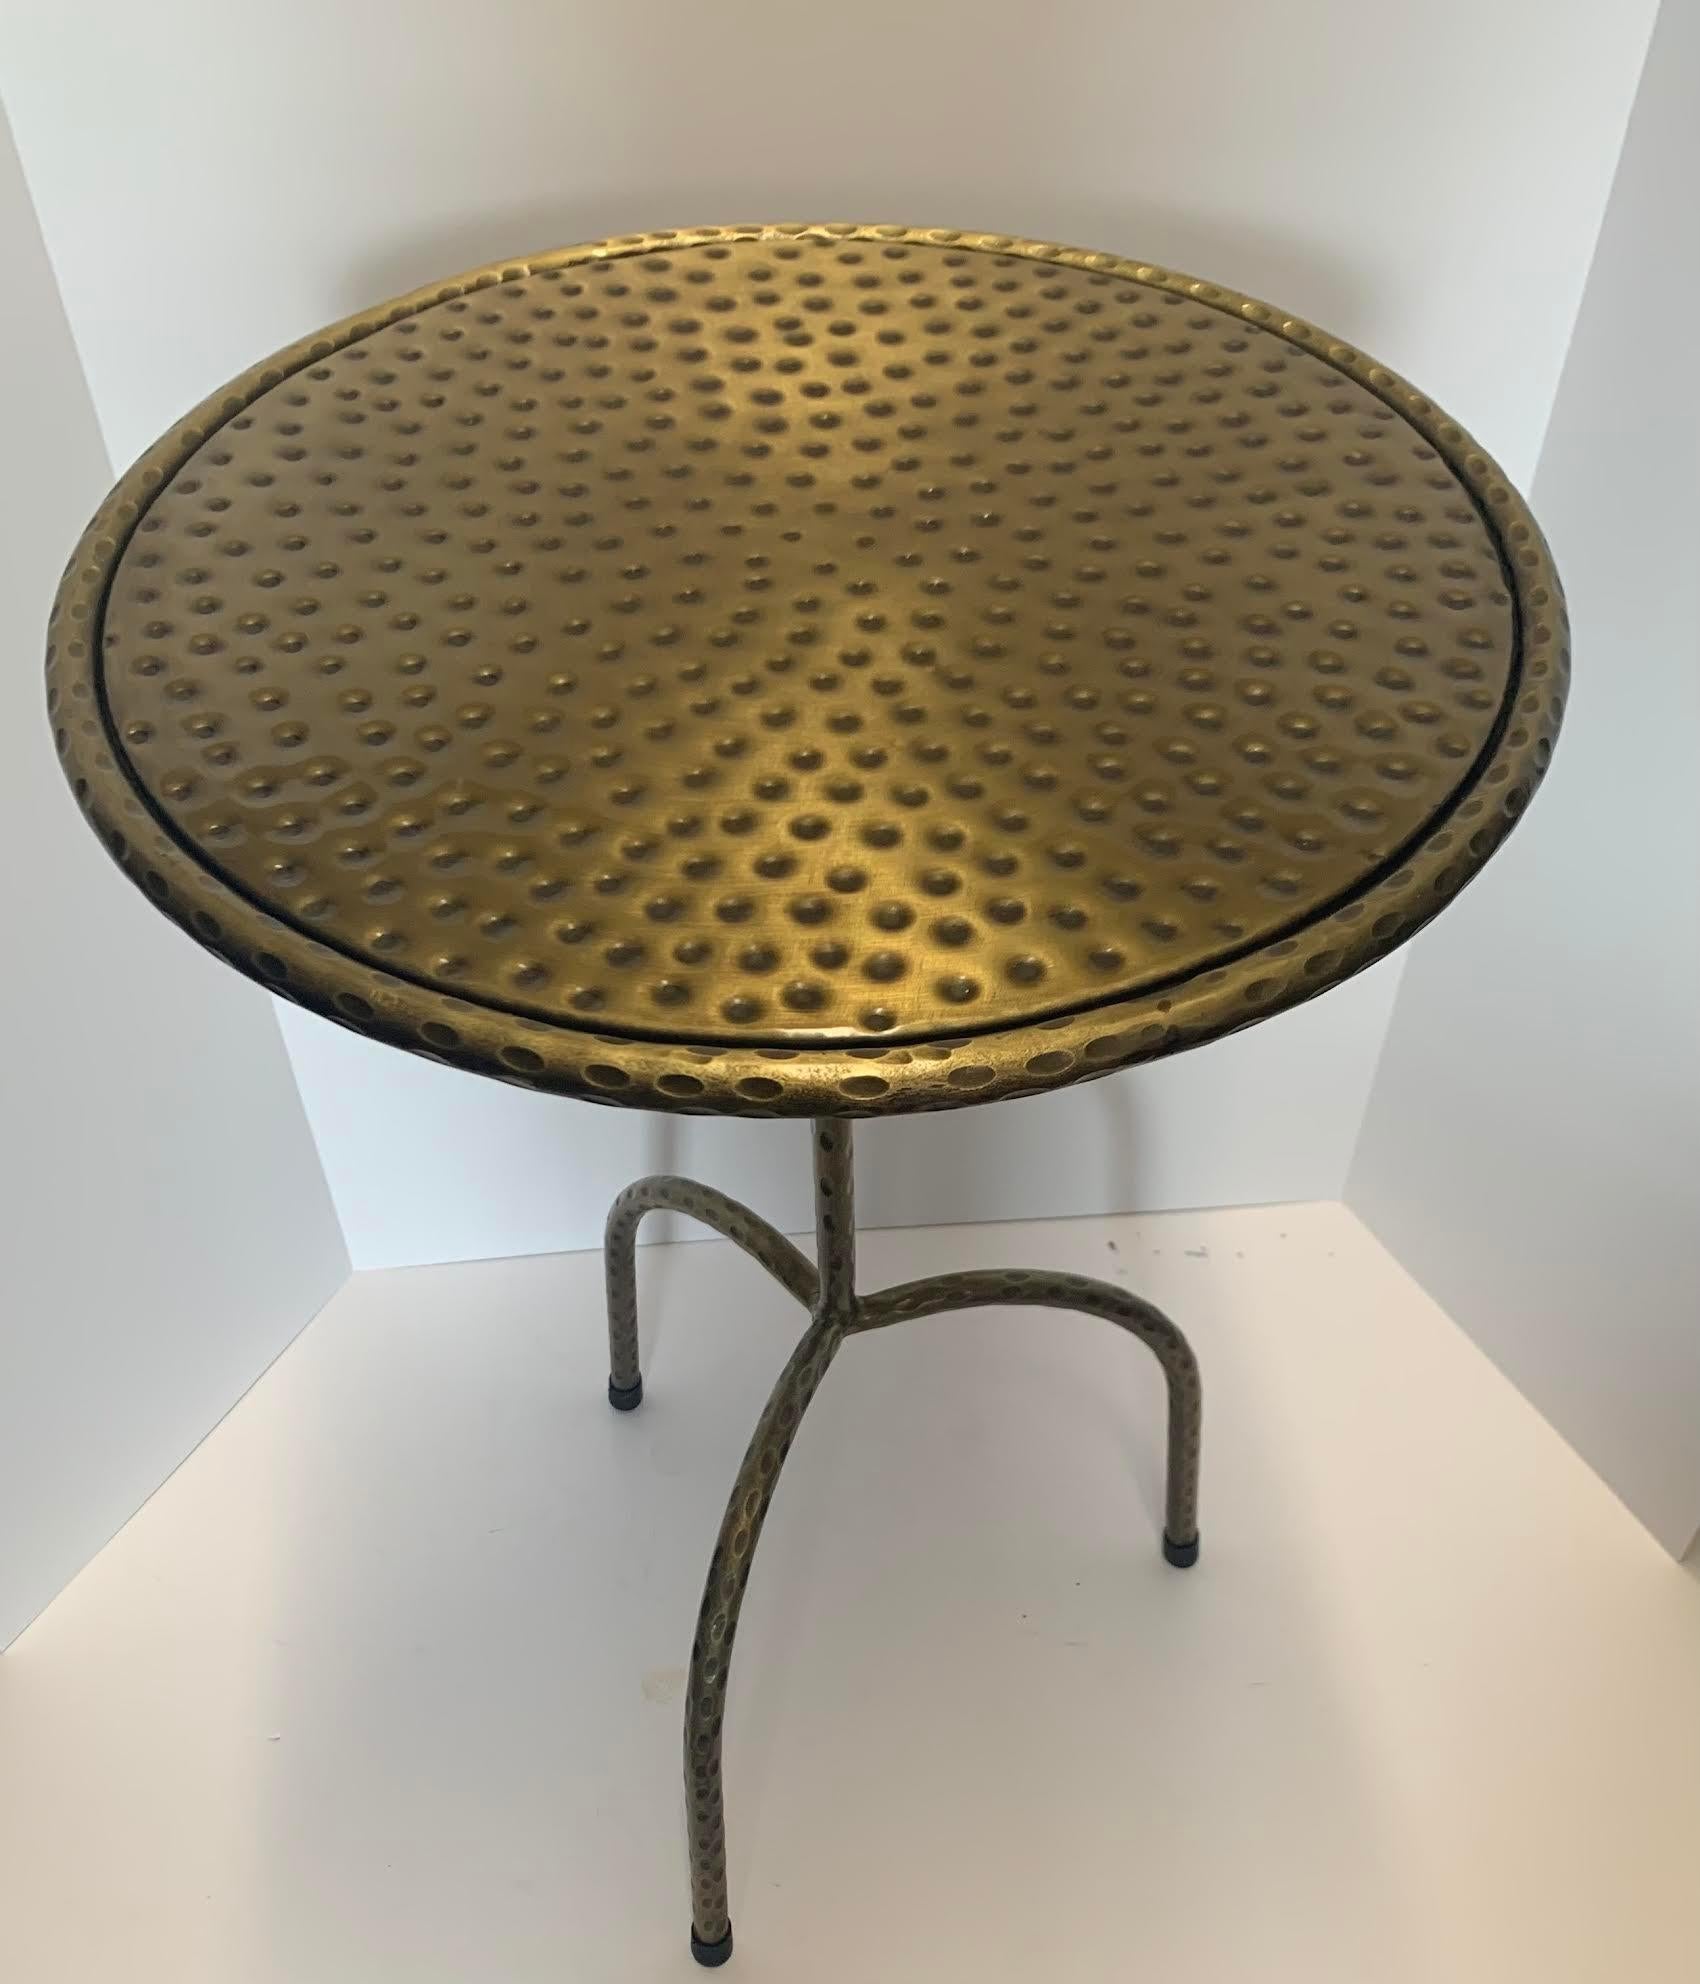 Contemporary Indian hammered brass top cocktail table.
Tripod legs.